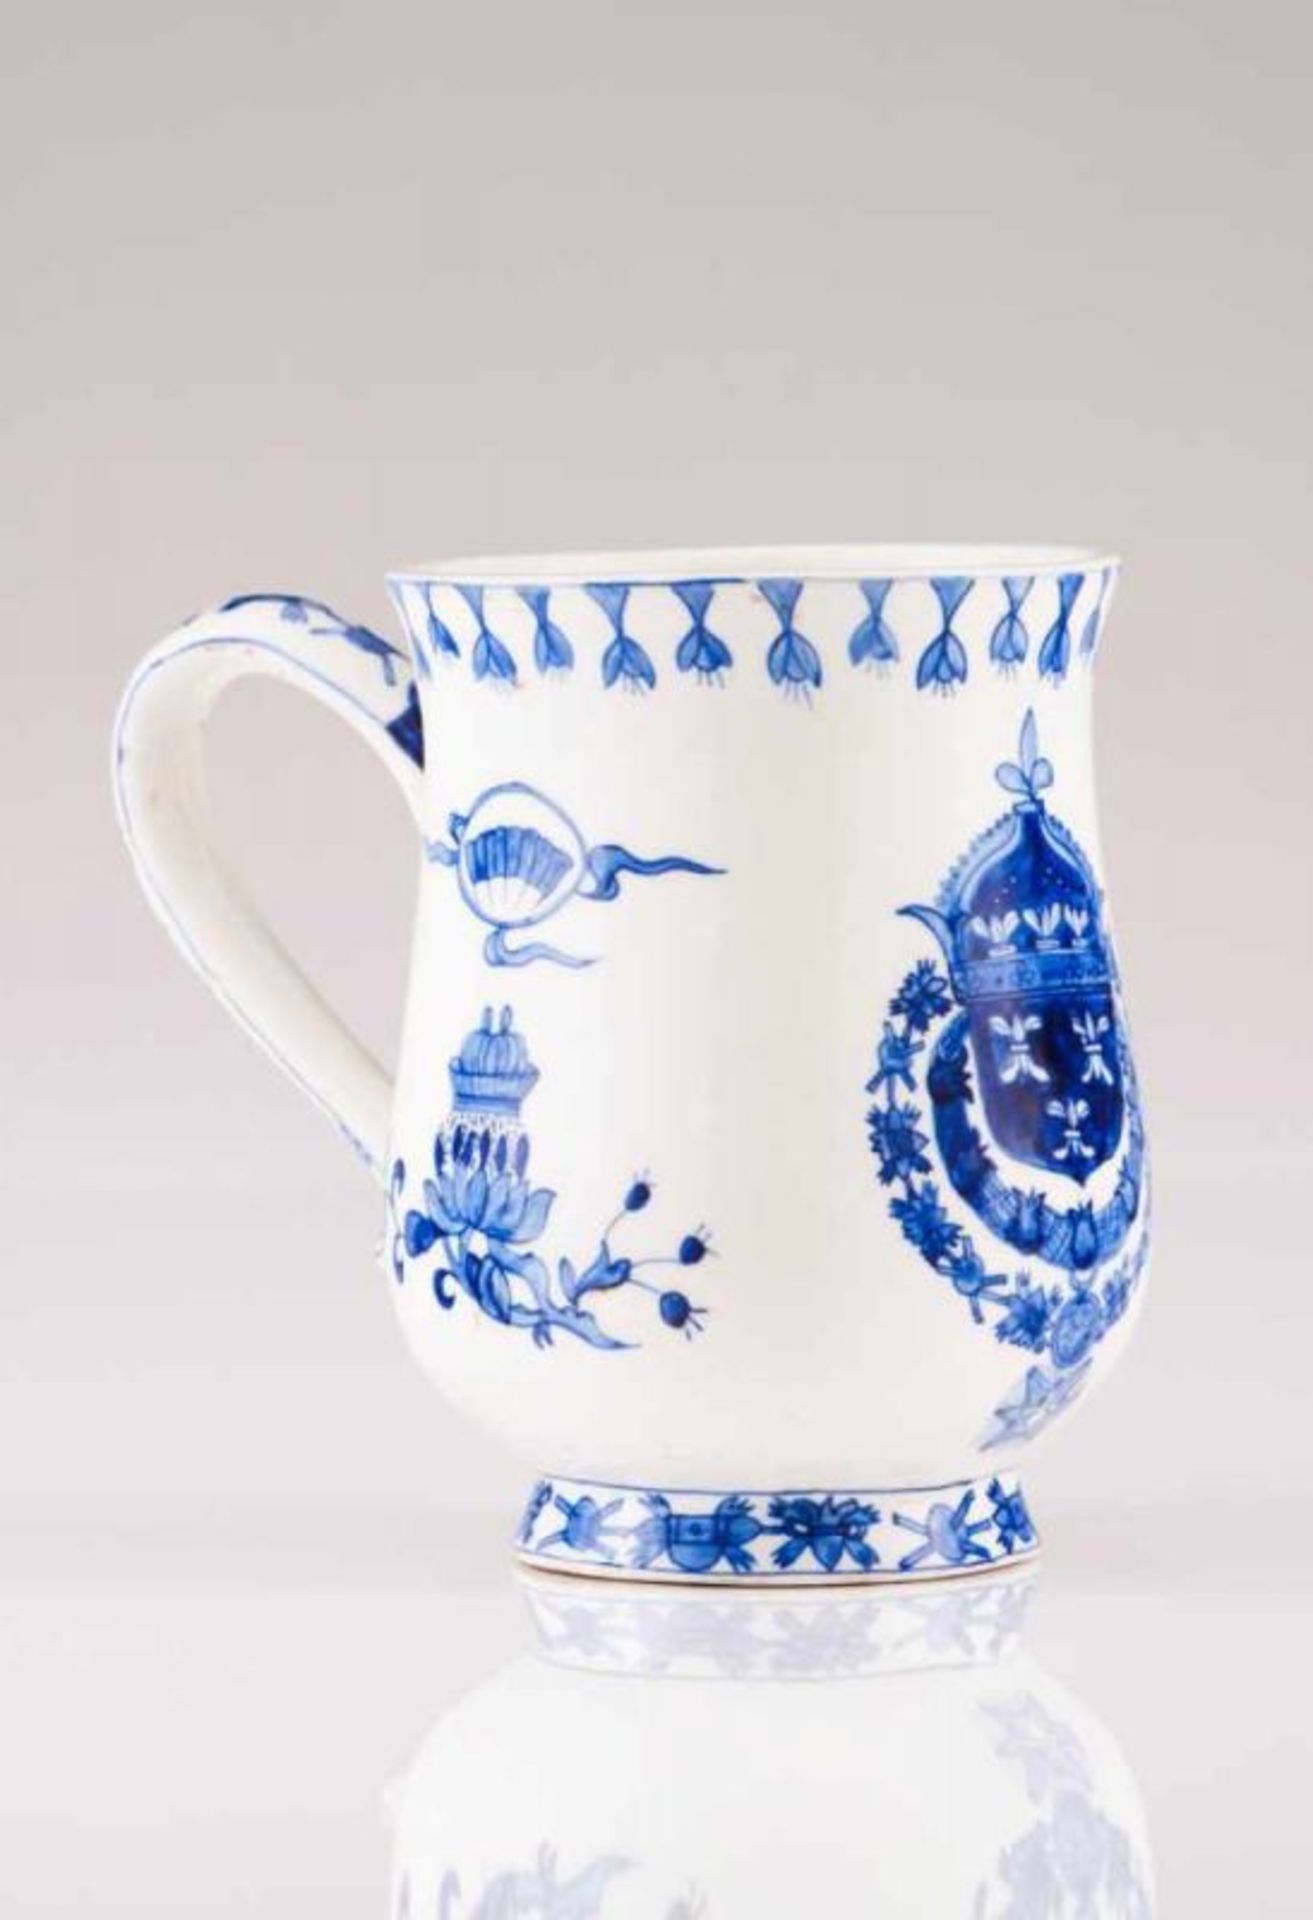 A mug European porcelain Blue decoration depicting floral motifs and French royal coat-of-arms